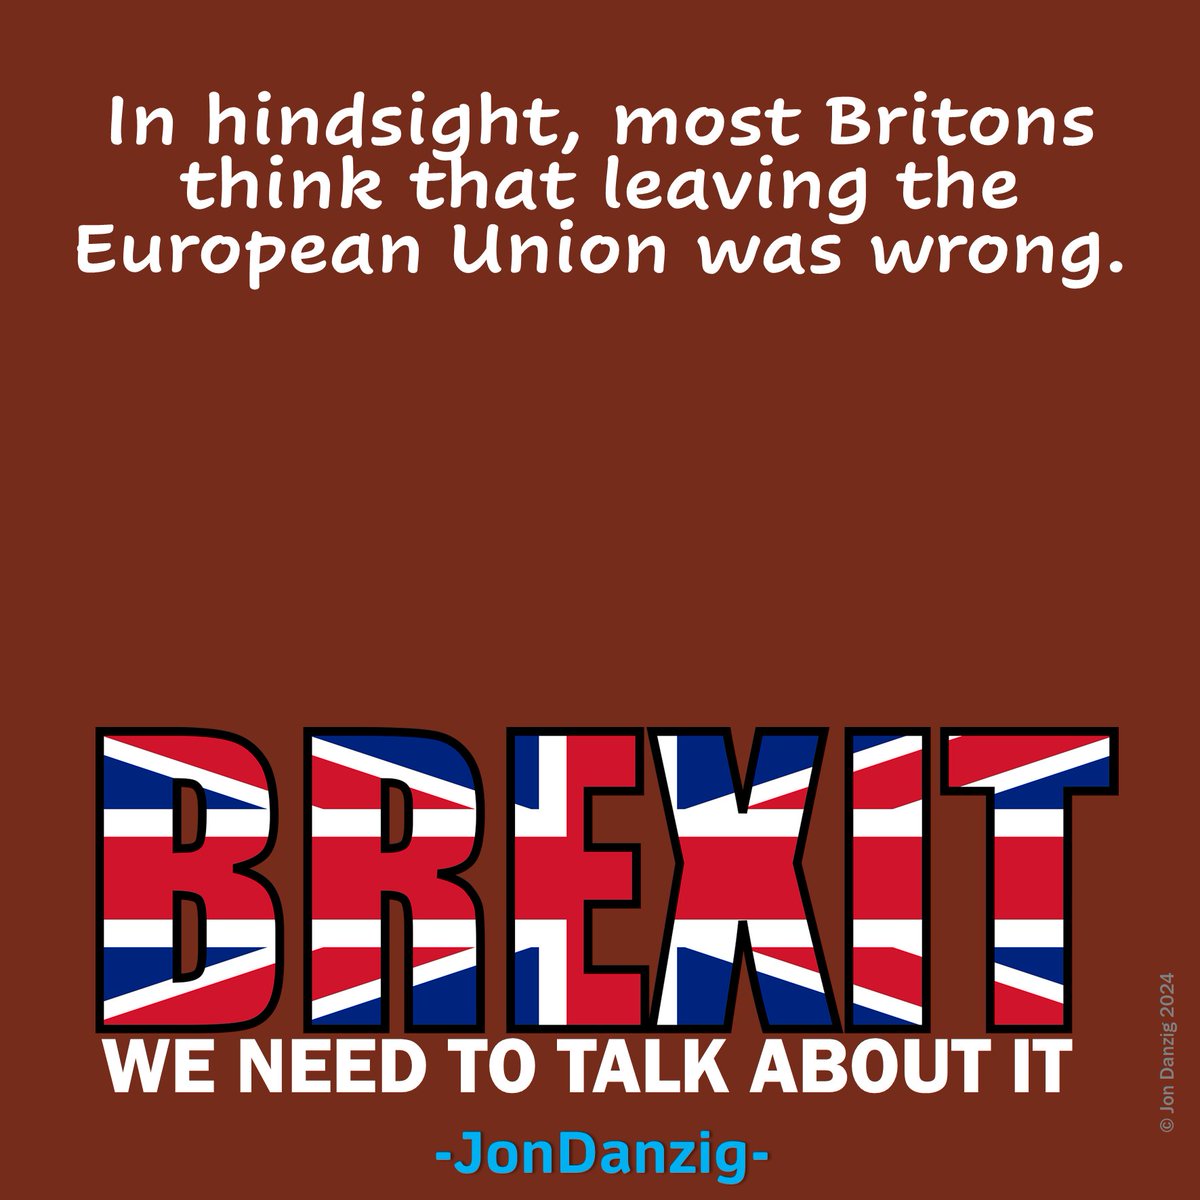 55 percent of people in Great Britain think it was wrong to leave the European Union, compared with 34 percent who think it was the right decision. Source: bit.ly/4bsCcgt #Brexit #EU #democracy